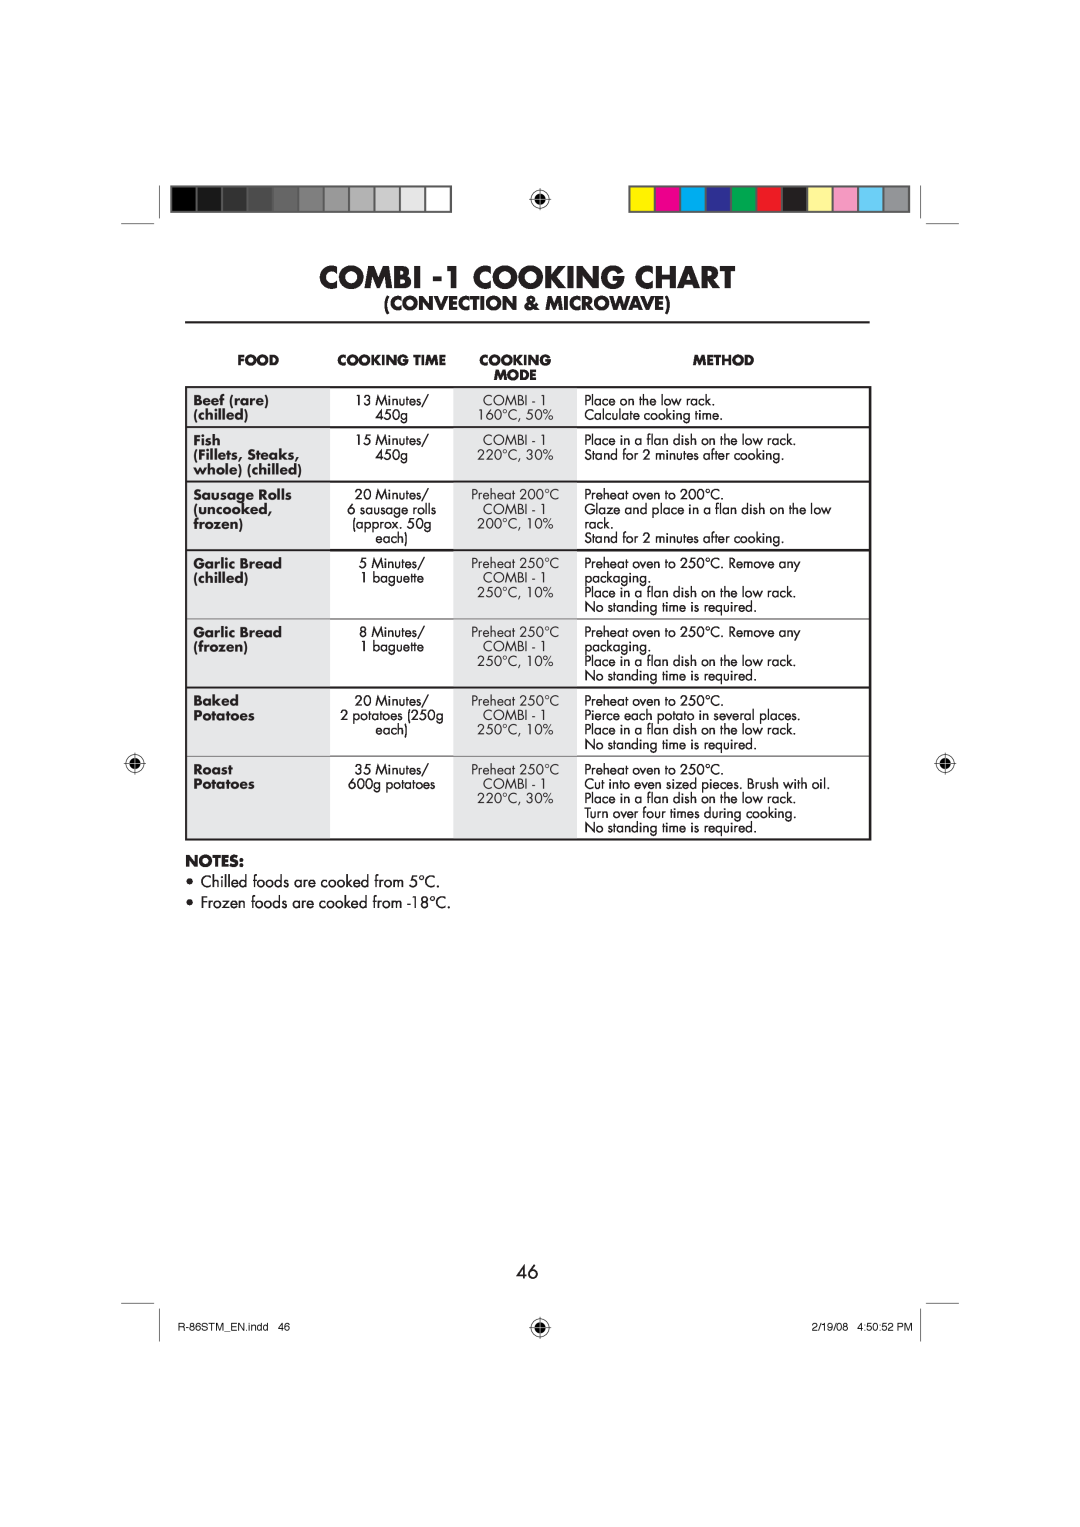 Sharp R-86STM manual COMBI -1 COOKING CHART, Convection & Microwave 